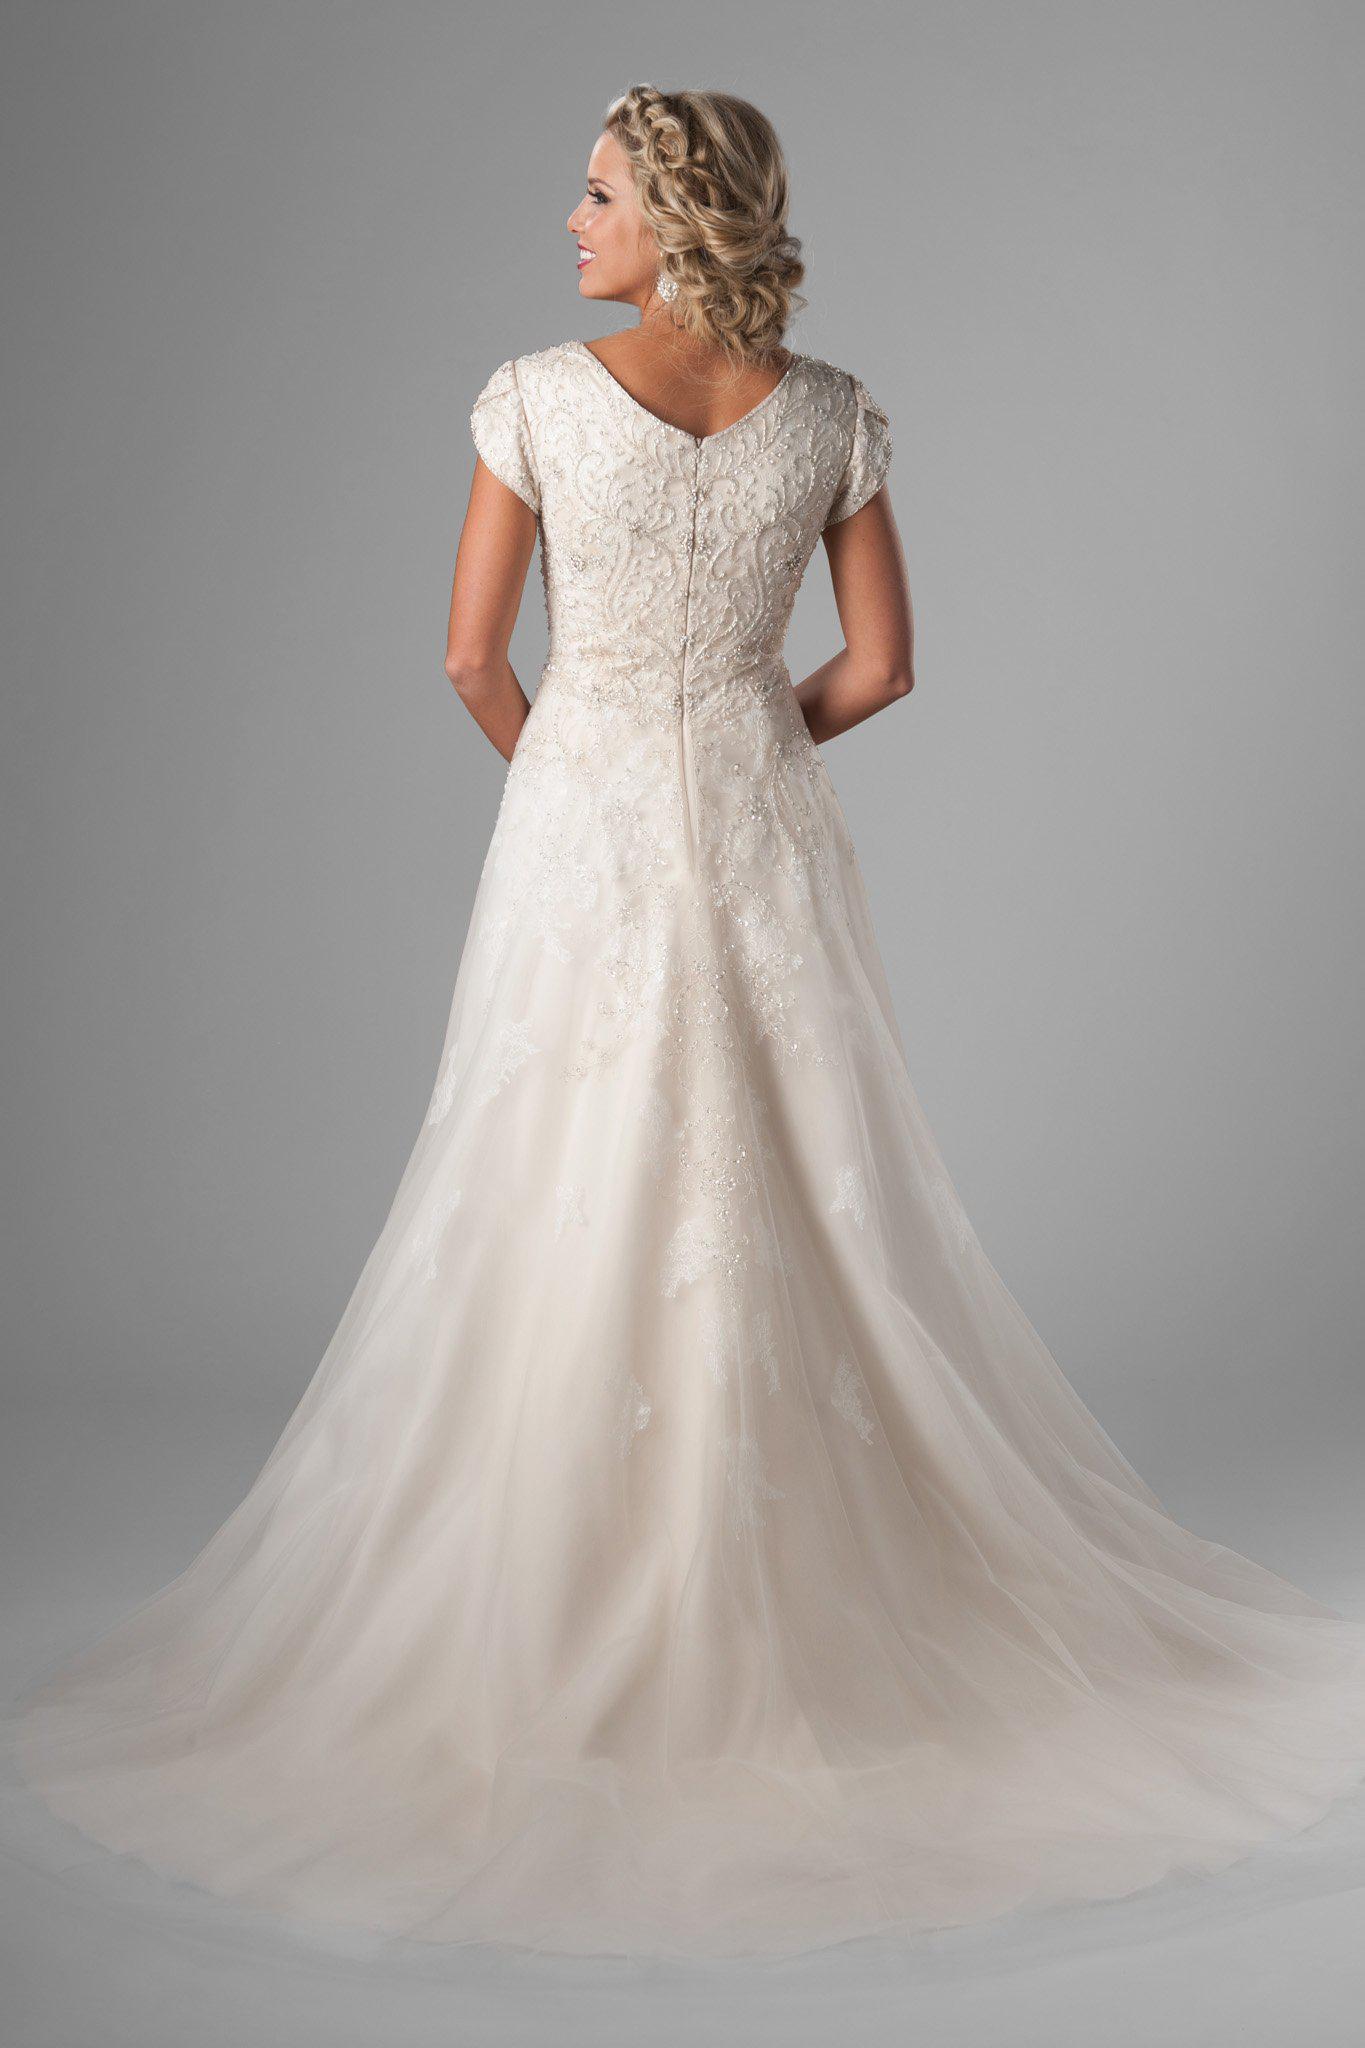 modest wedding gown. We love the bedazzled bodice, changing to soft flowing lace on the tulle skirt, salt lake city, back view